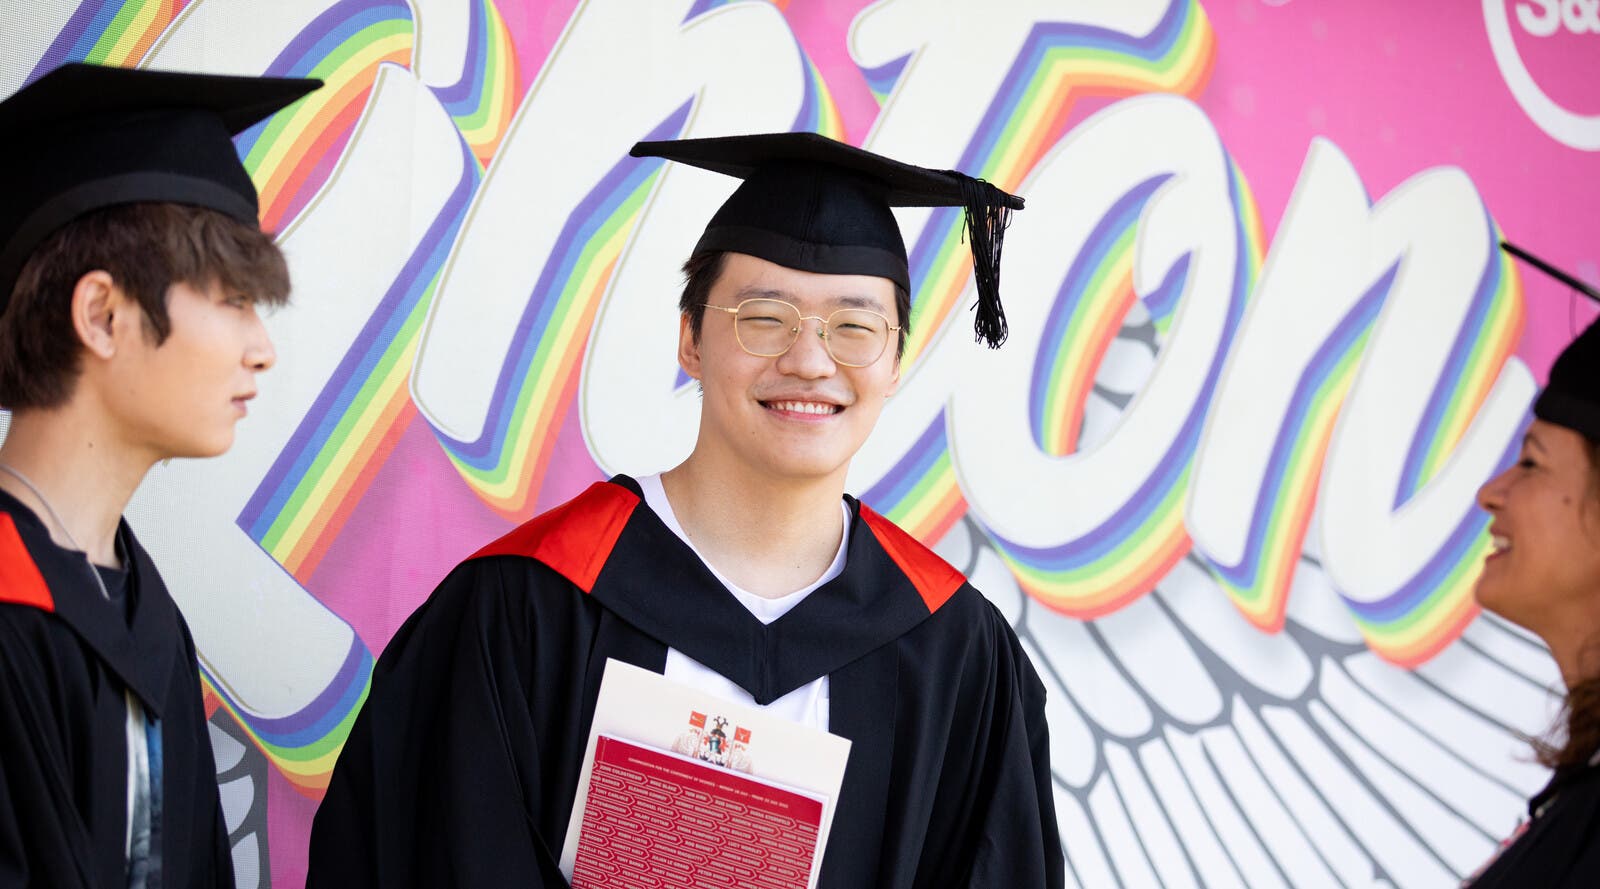 A student smiling in a graduation cap and gown.